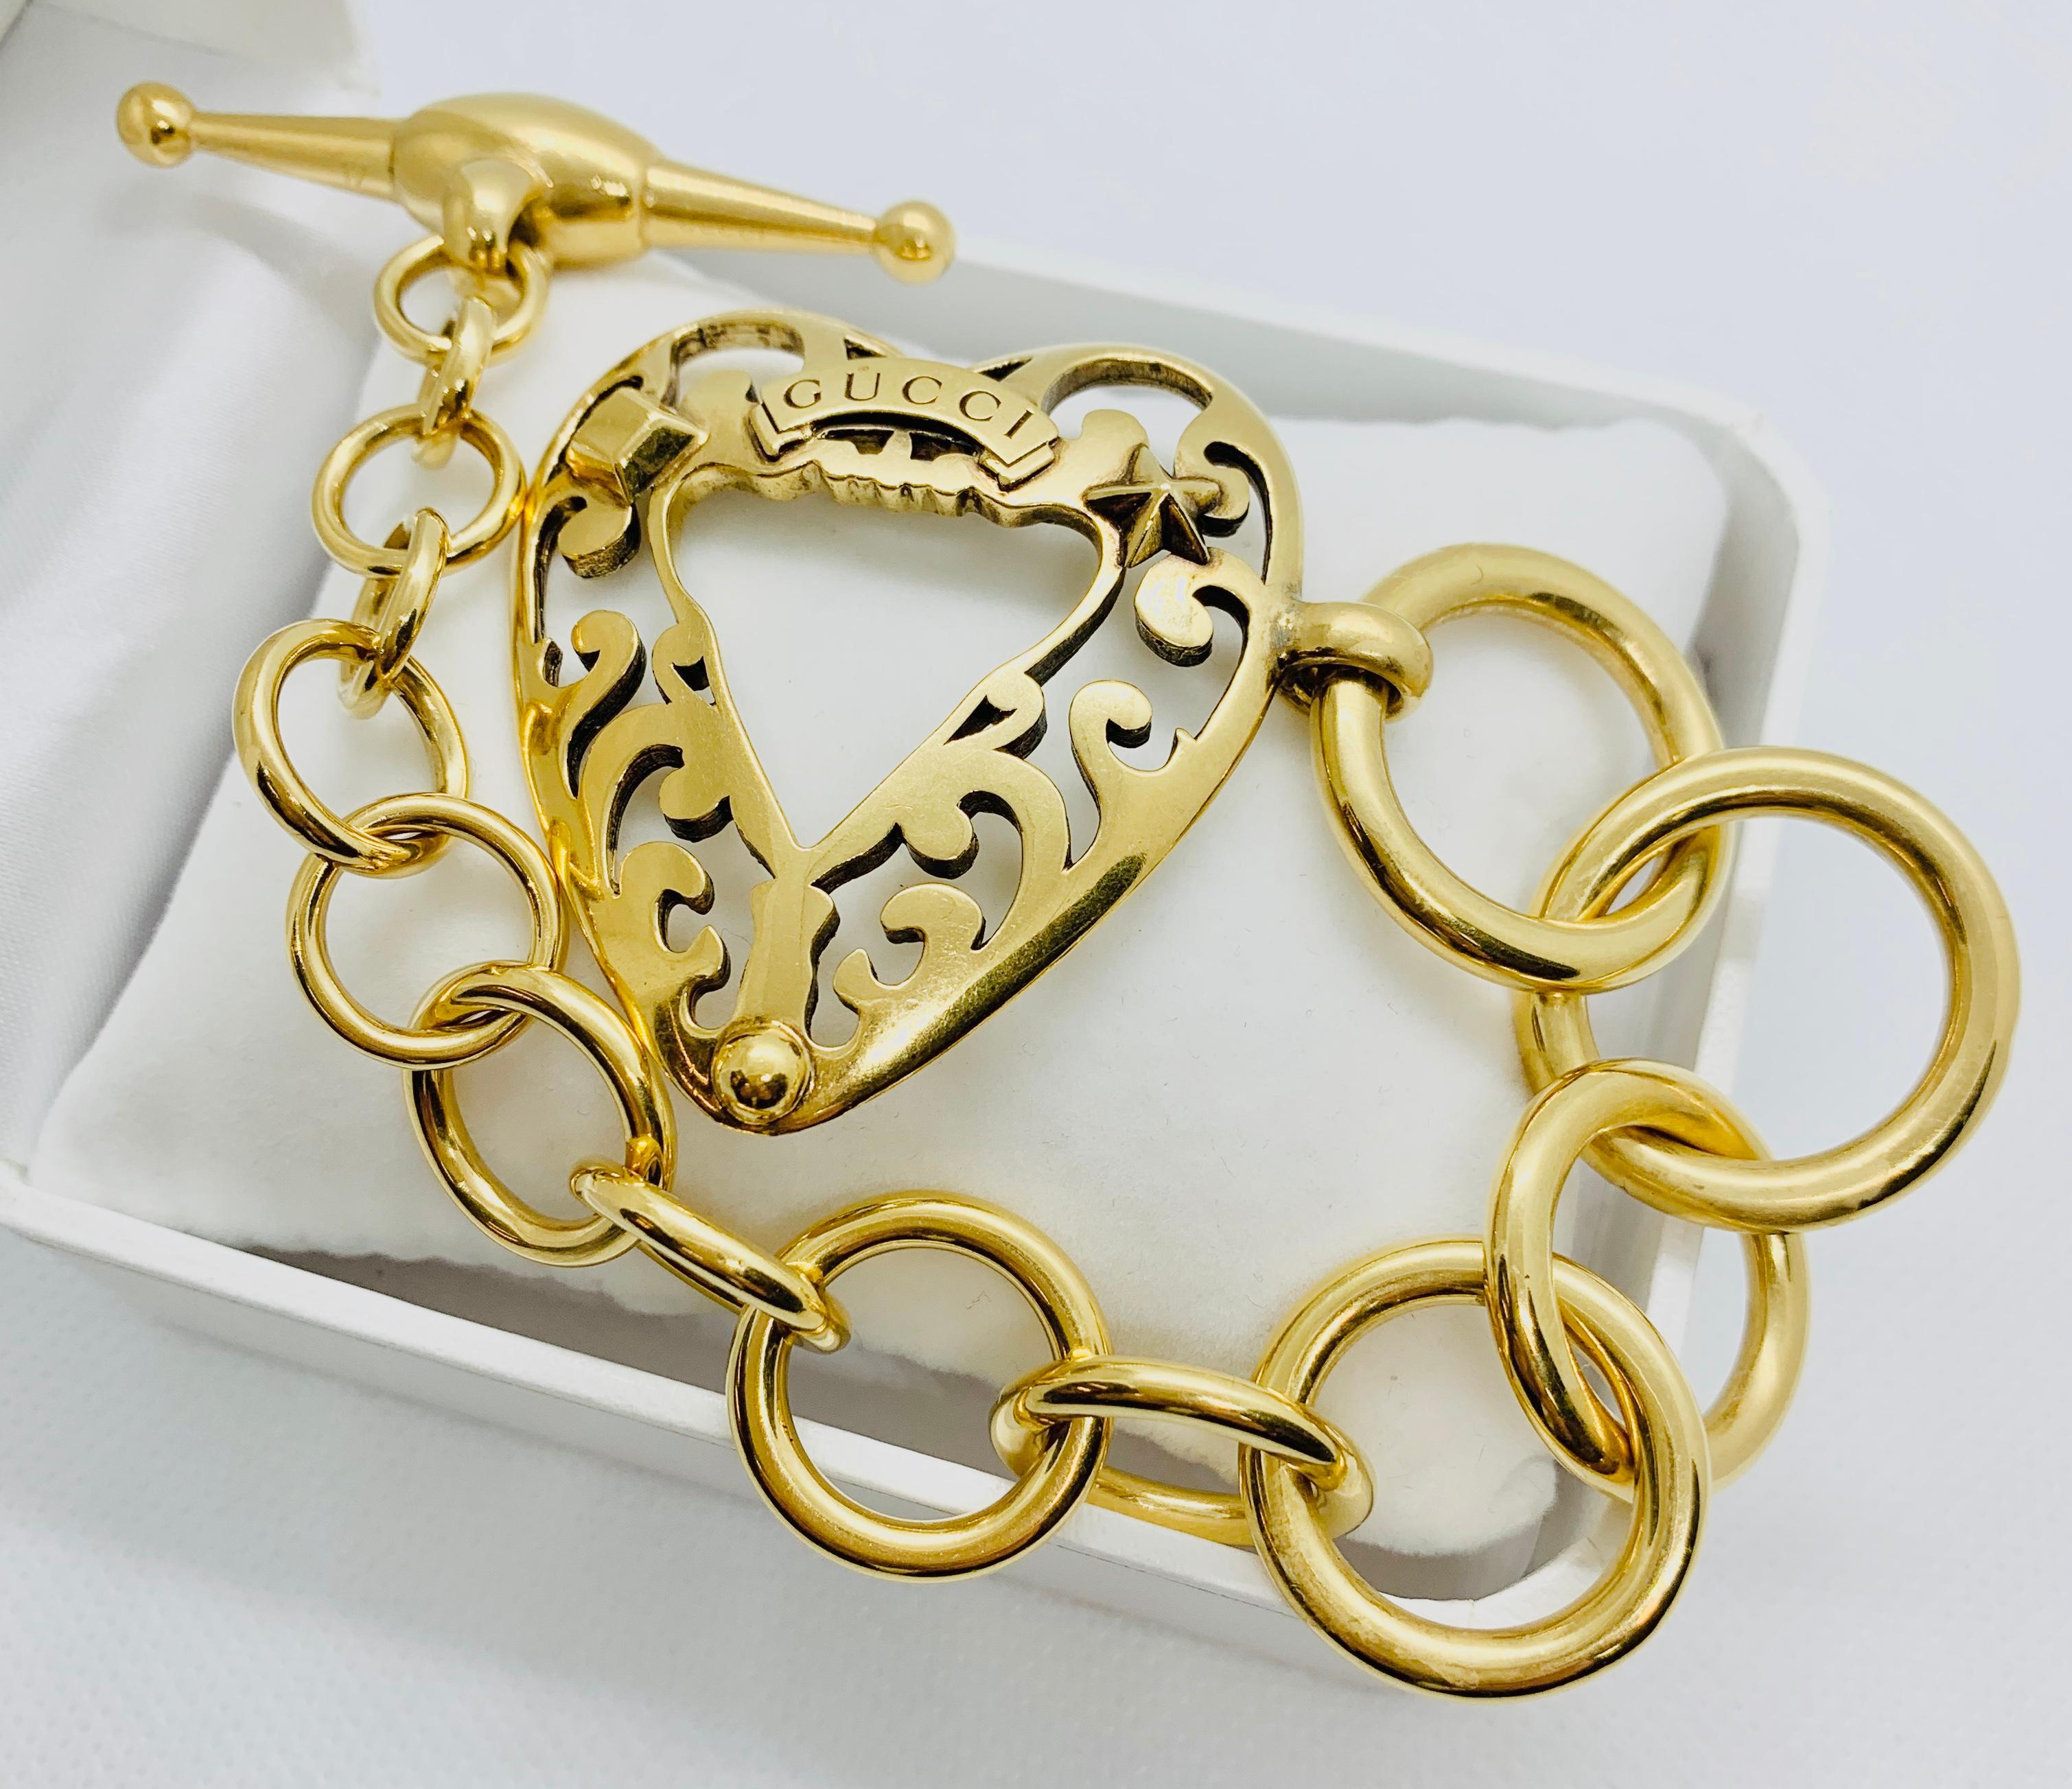 Gucci 18 Karat Gold Link Bracelet with Toggle Clasp & Heart Shaped Center Piece 7